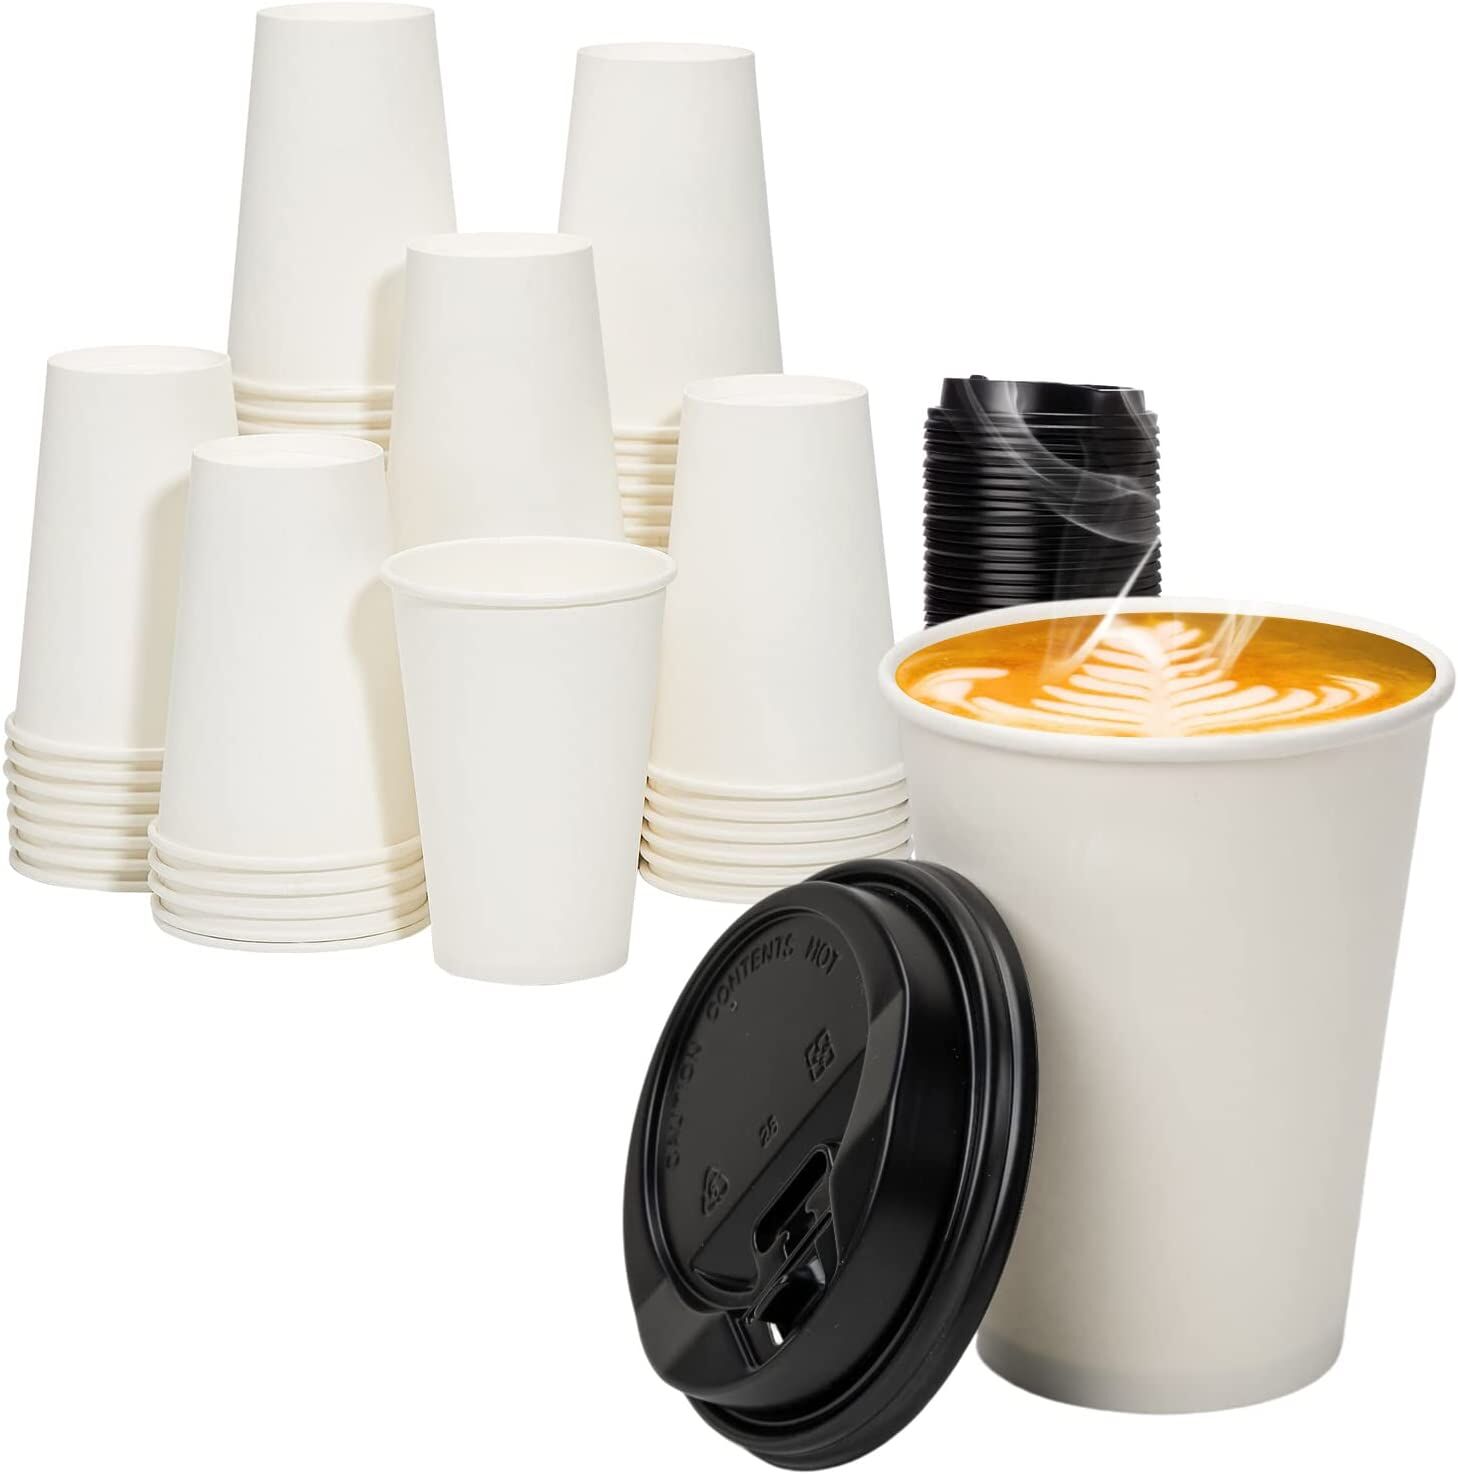 Comfy Package 12 Oz Kraft Paper Cups Disposable Coffee Cups Unbleached,  100-Pack 